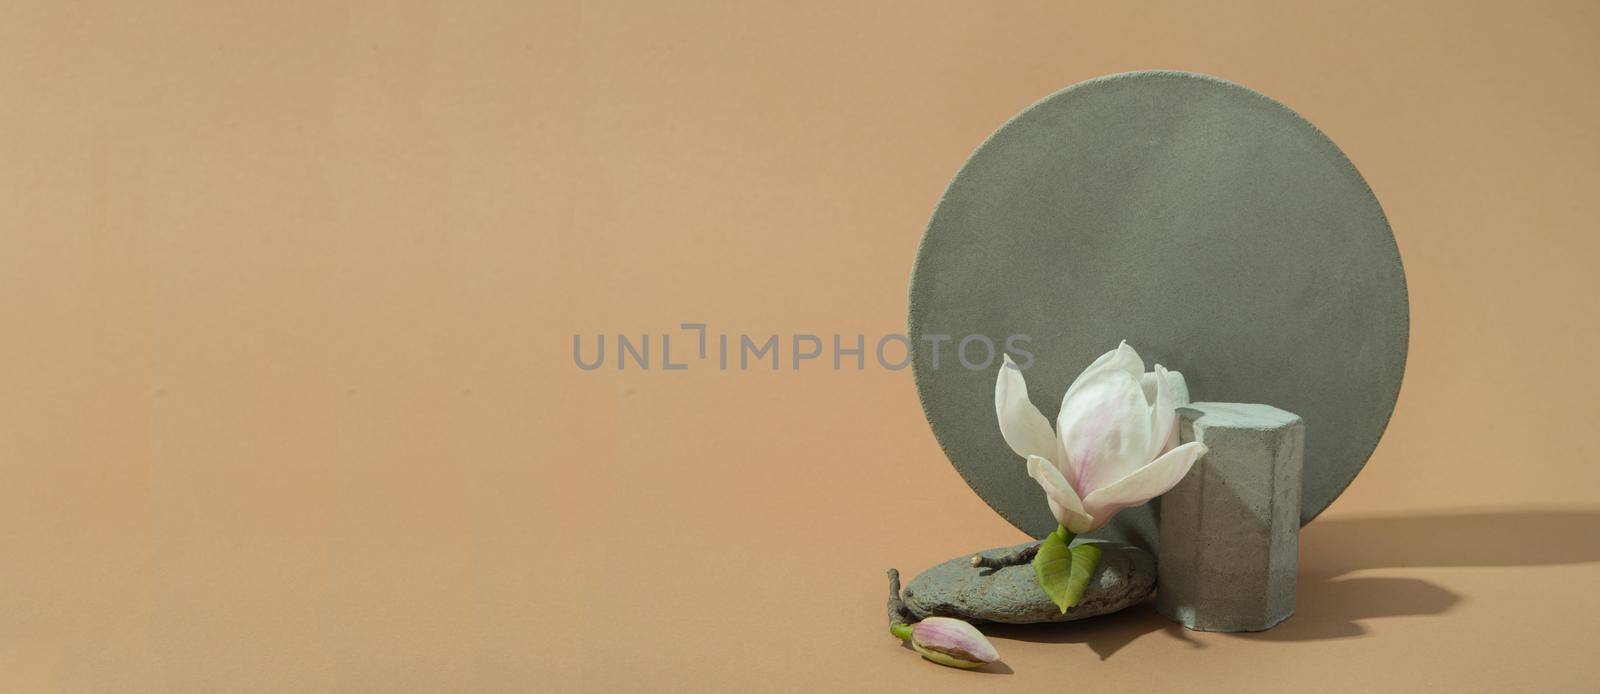 minimalist banner with concrete shapes and blooming flower on pastel background by maramorosz